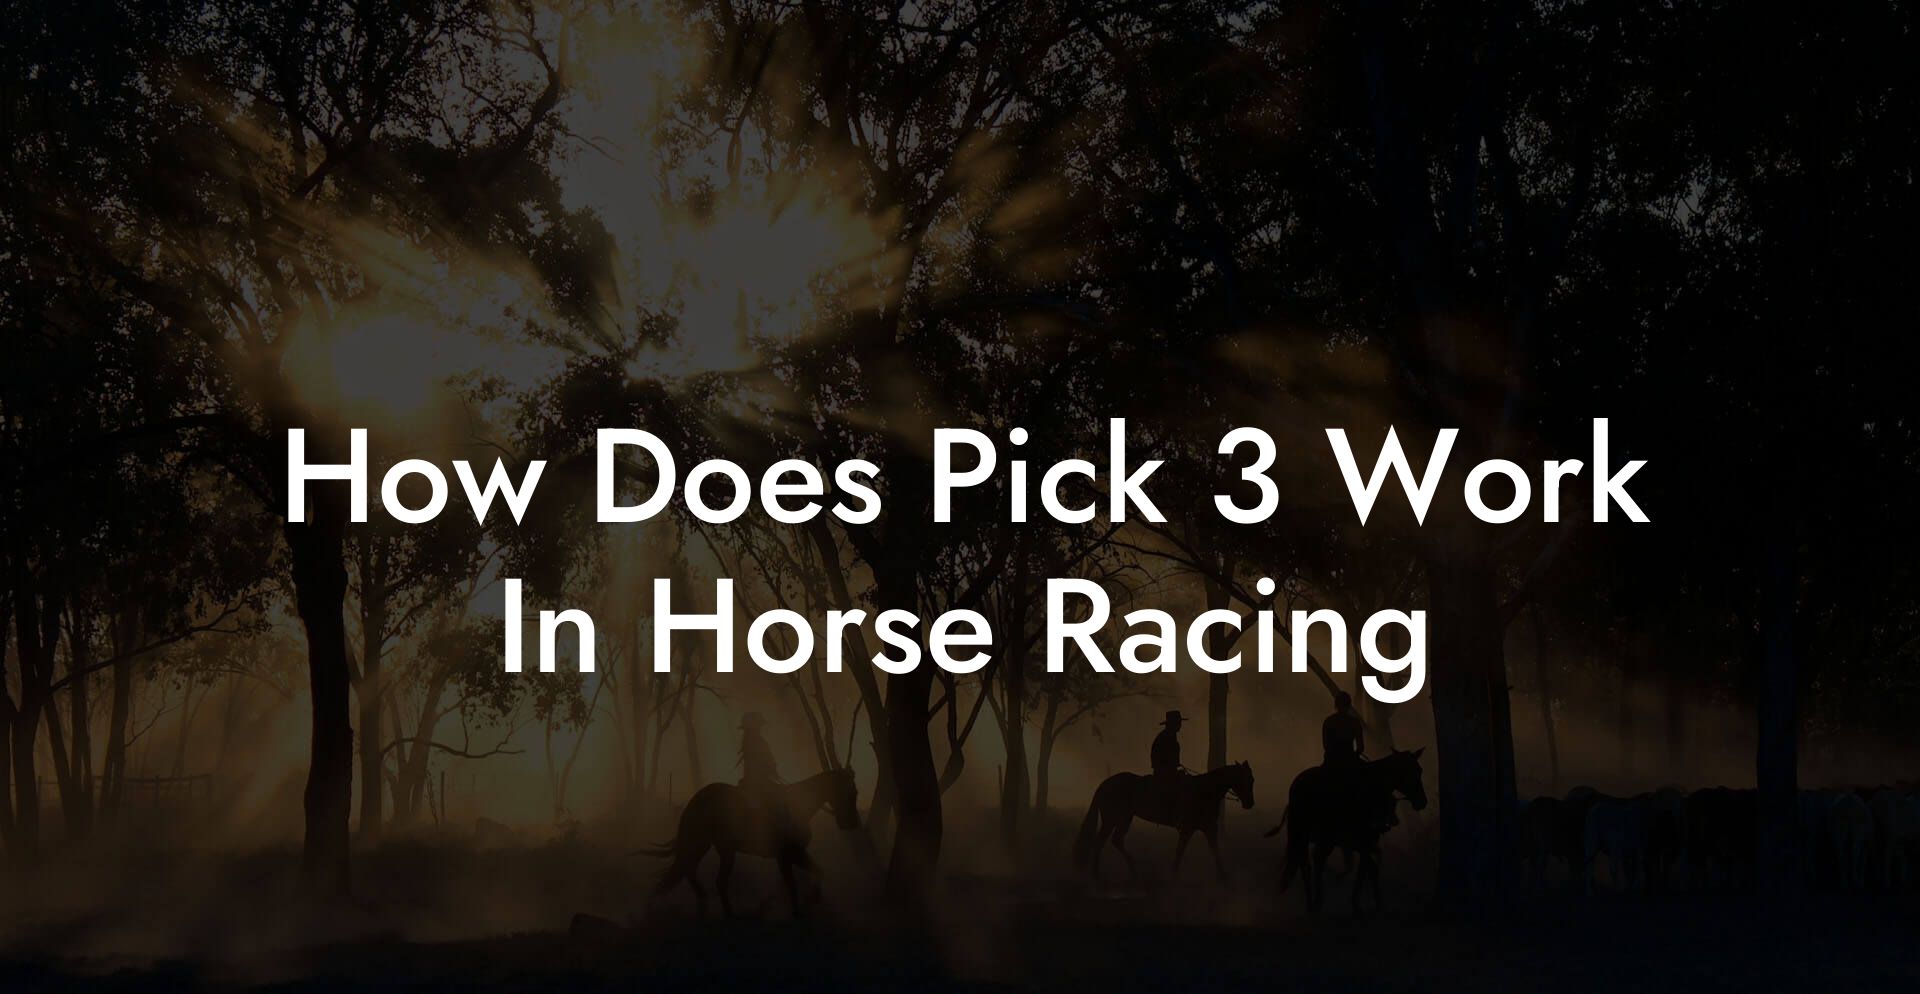 How Does Pick 3 Work In Horse Racing